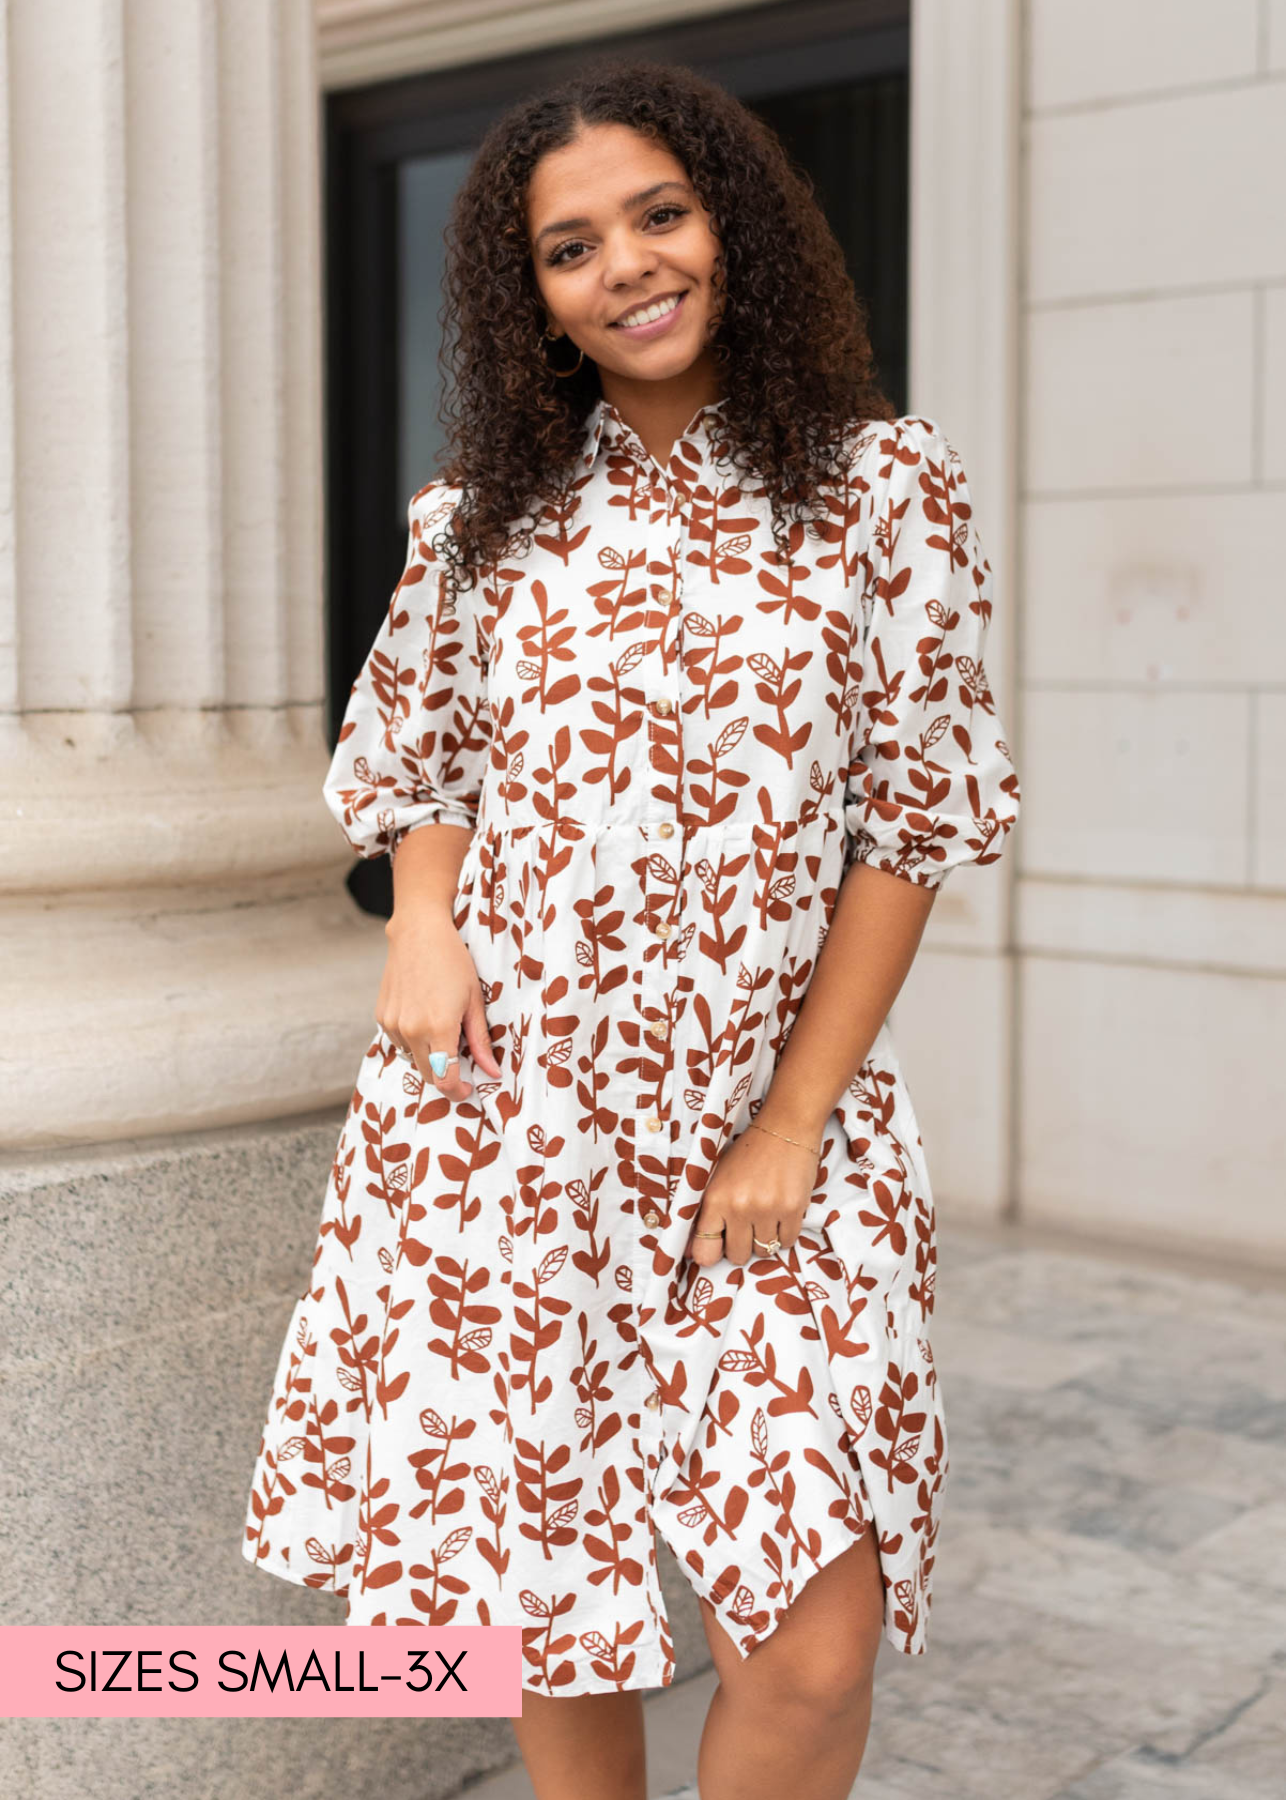 Brown floral dress with 3/4 sleeves